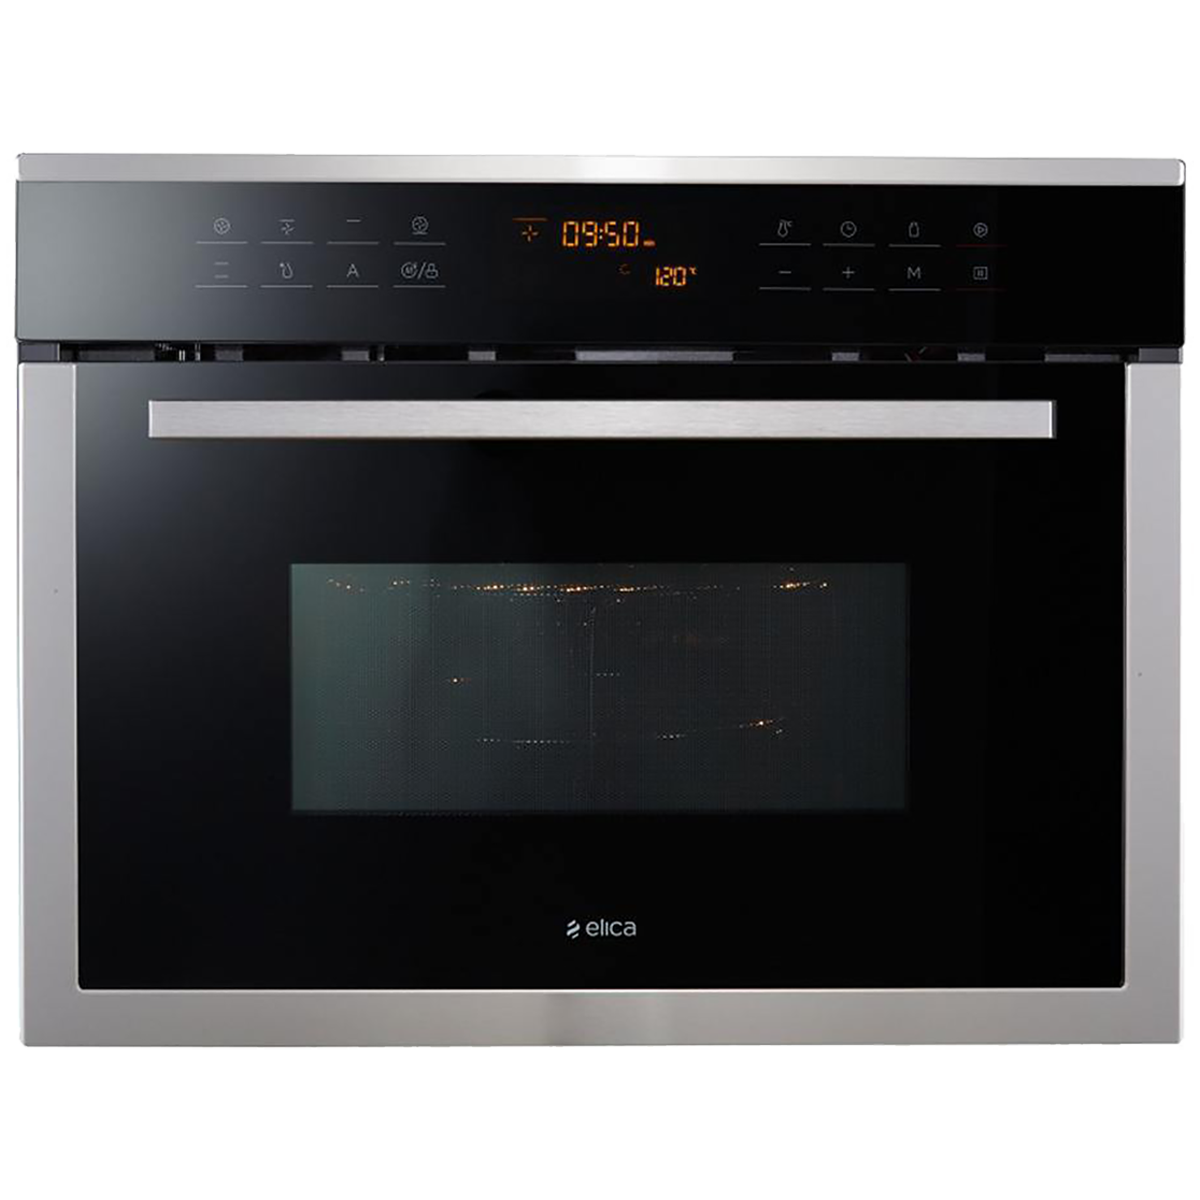 Elica EPBI 390 Compact 39 Litres Built-in Convection Oven (Stainless Steel + Glass Finish, Black)_1